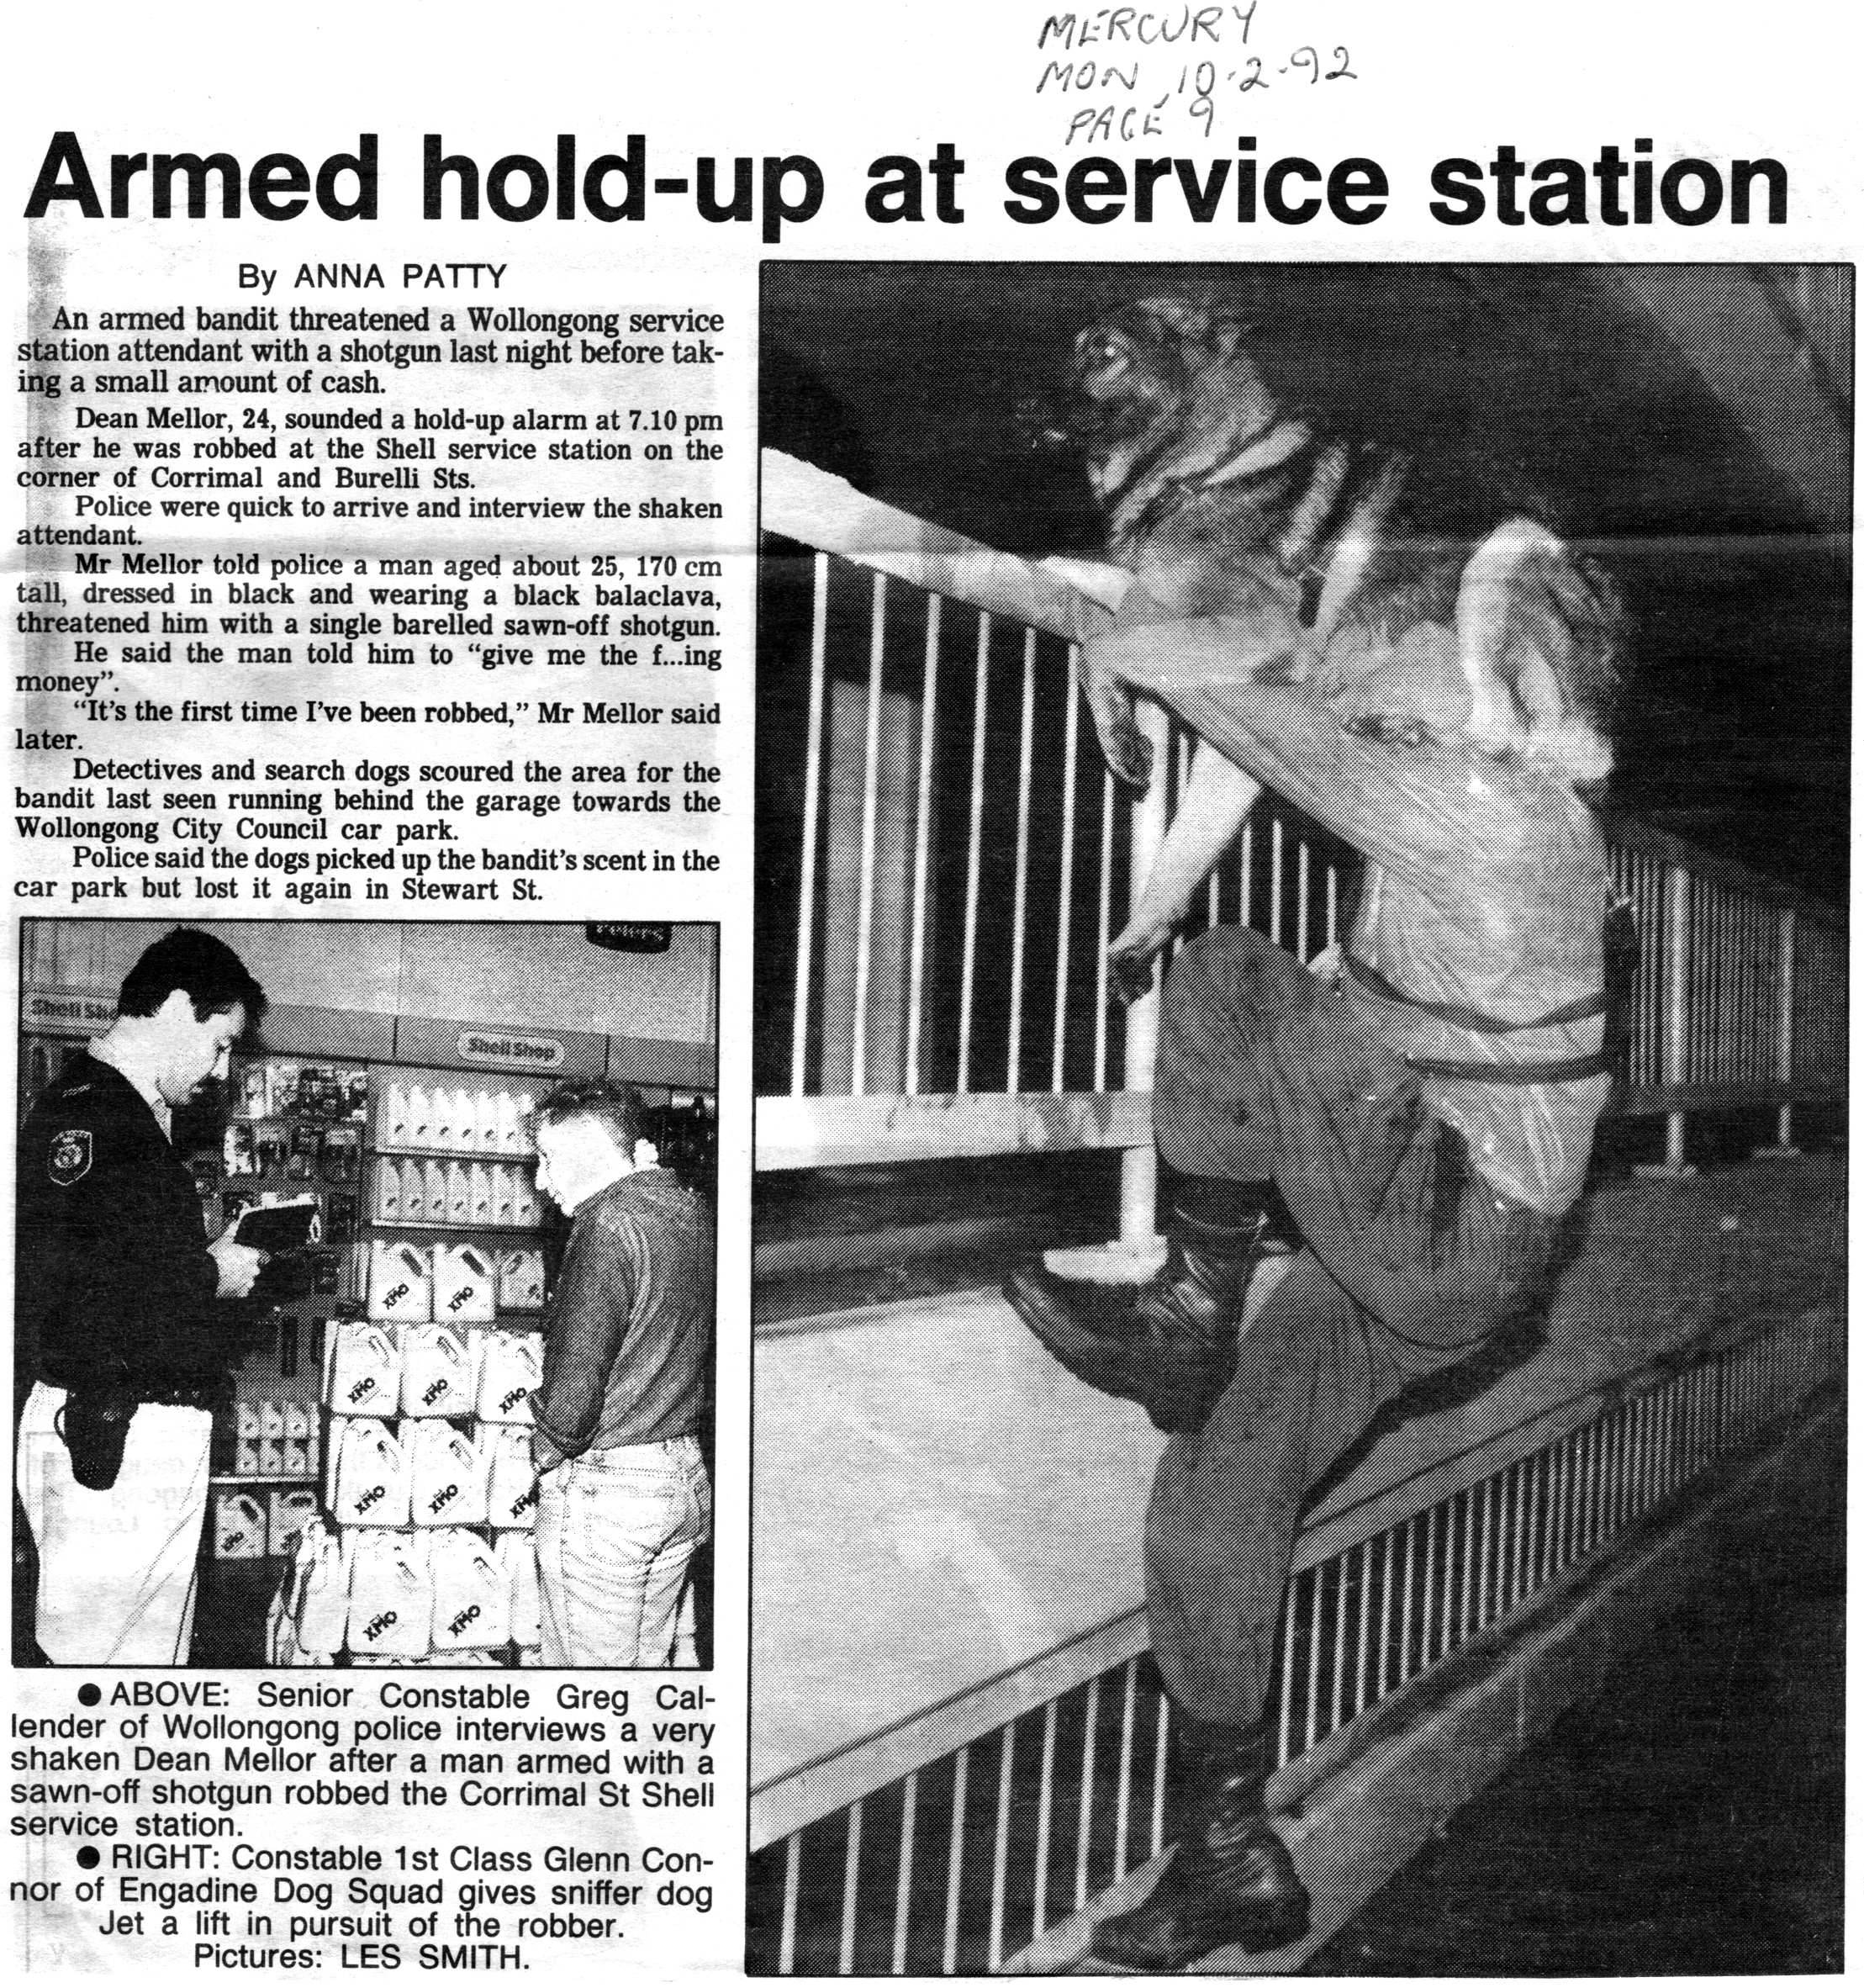 Armed hold up at service station. Illawarra Mercury page 9 Monday 10 February 1992 with police dog Jet